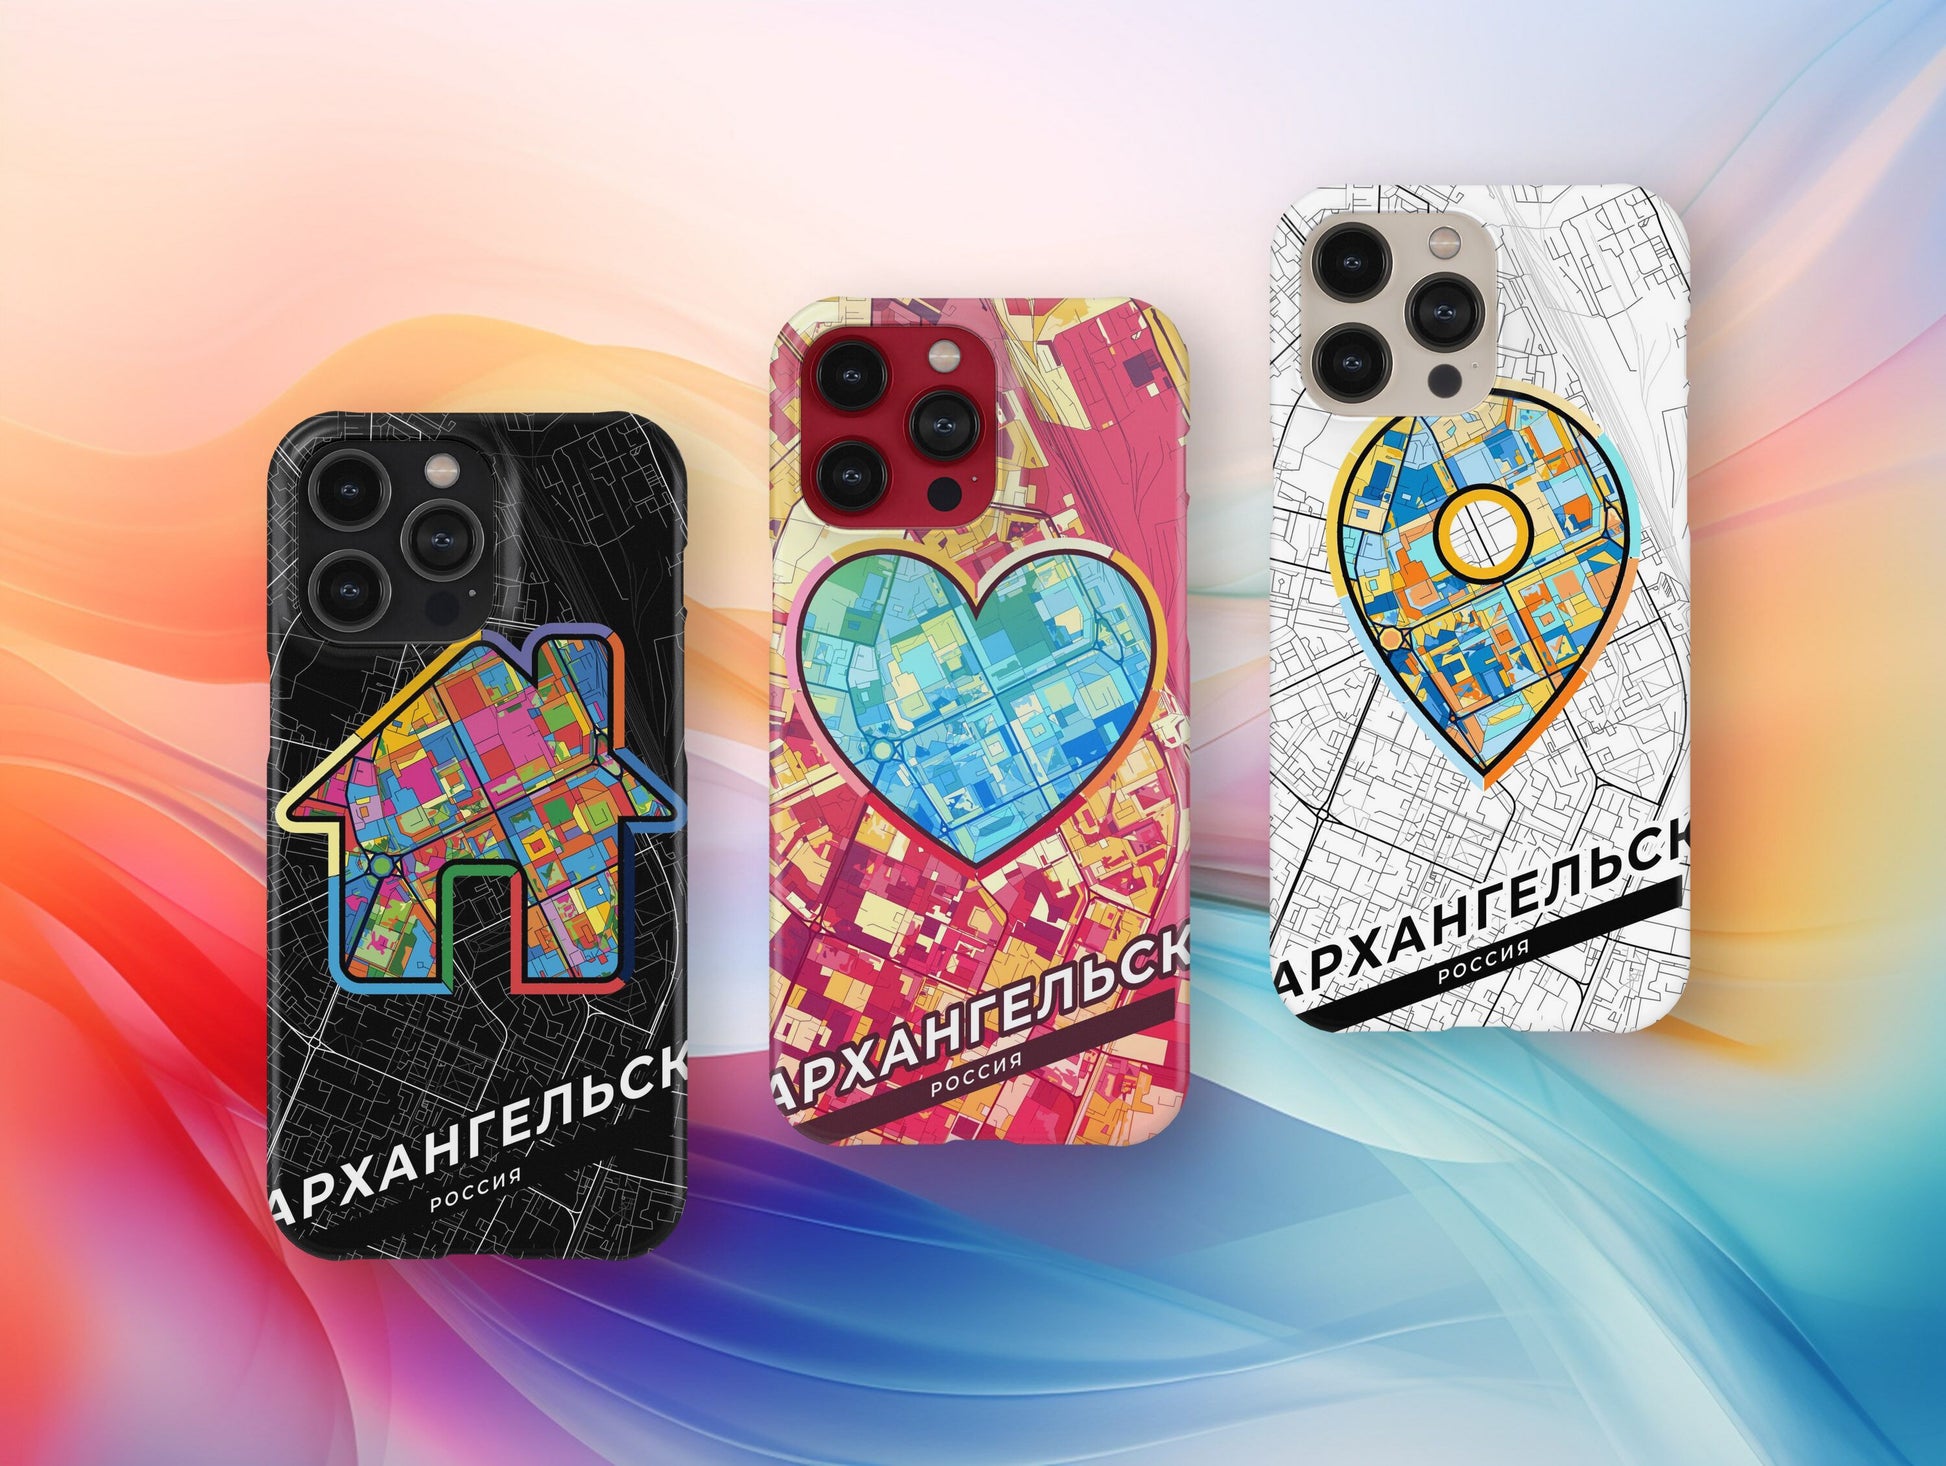 Arkhangelsk Russia slim phone case with colorful icon. Birthday, wedding or housewarming gift. Couple match cases.